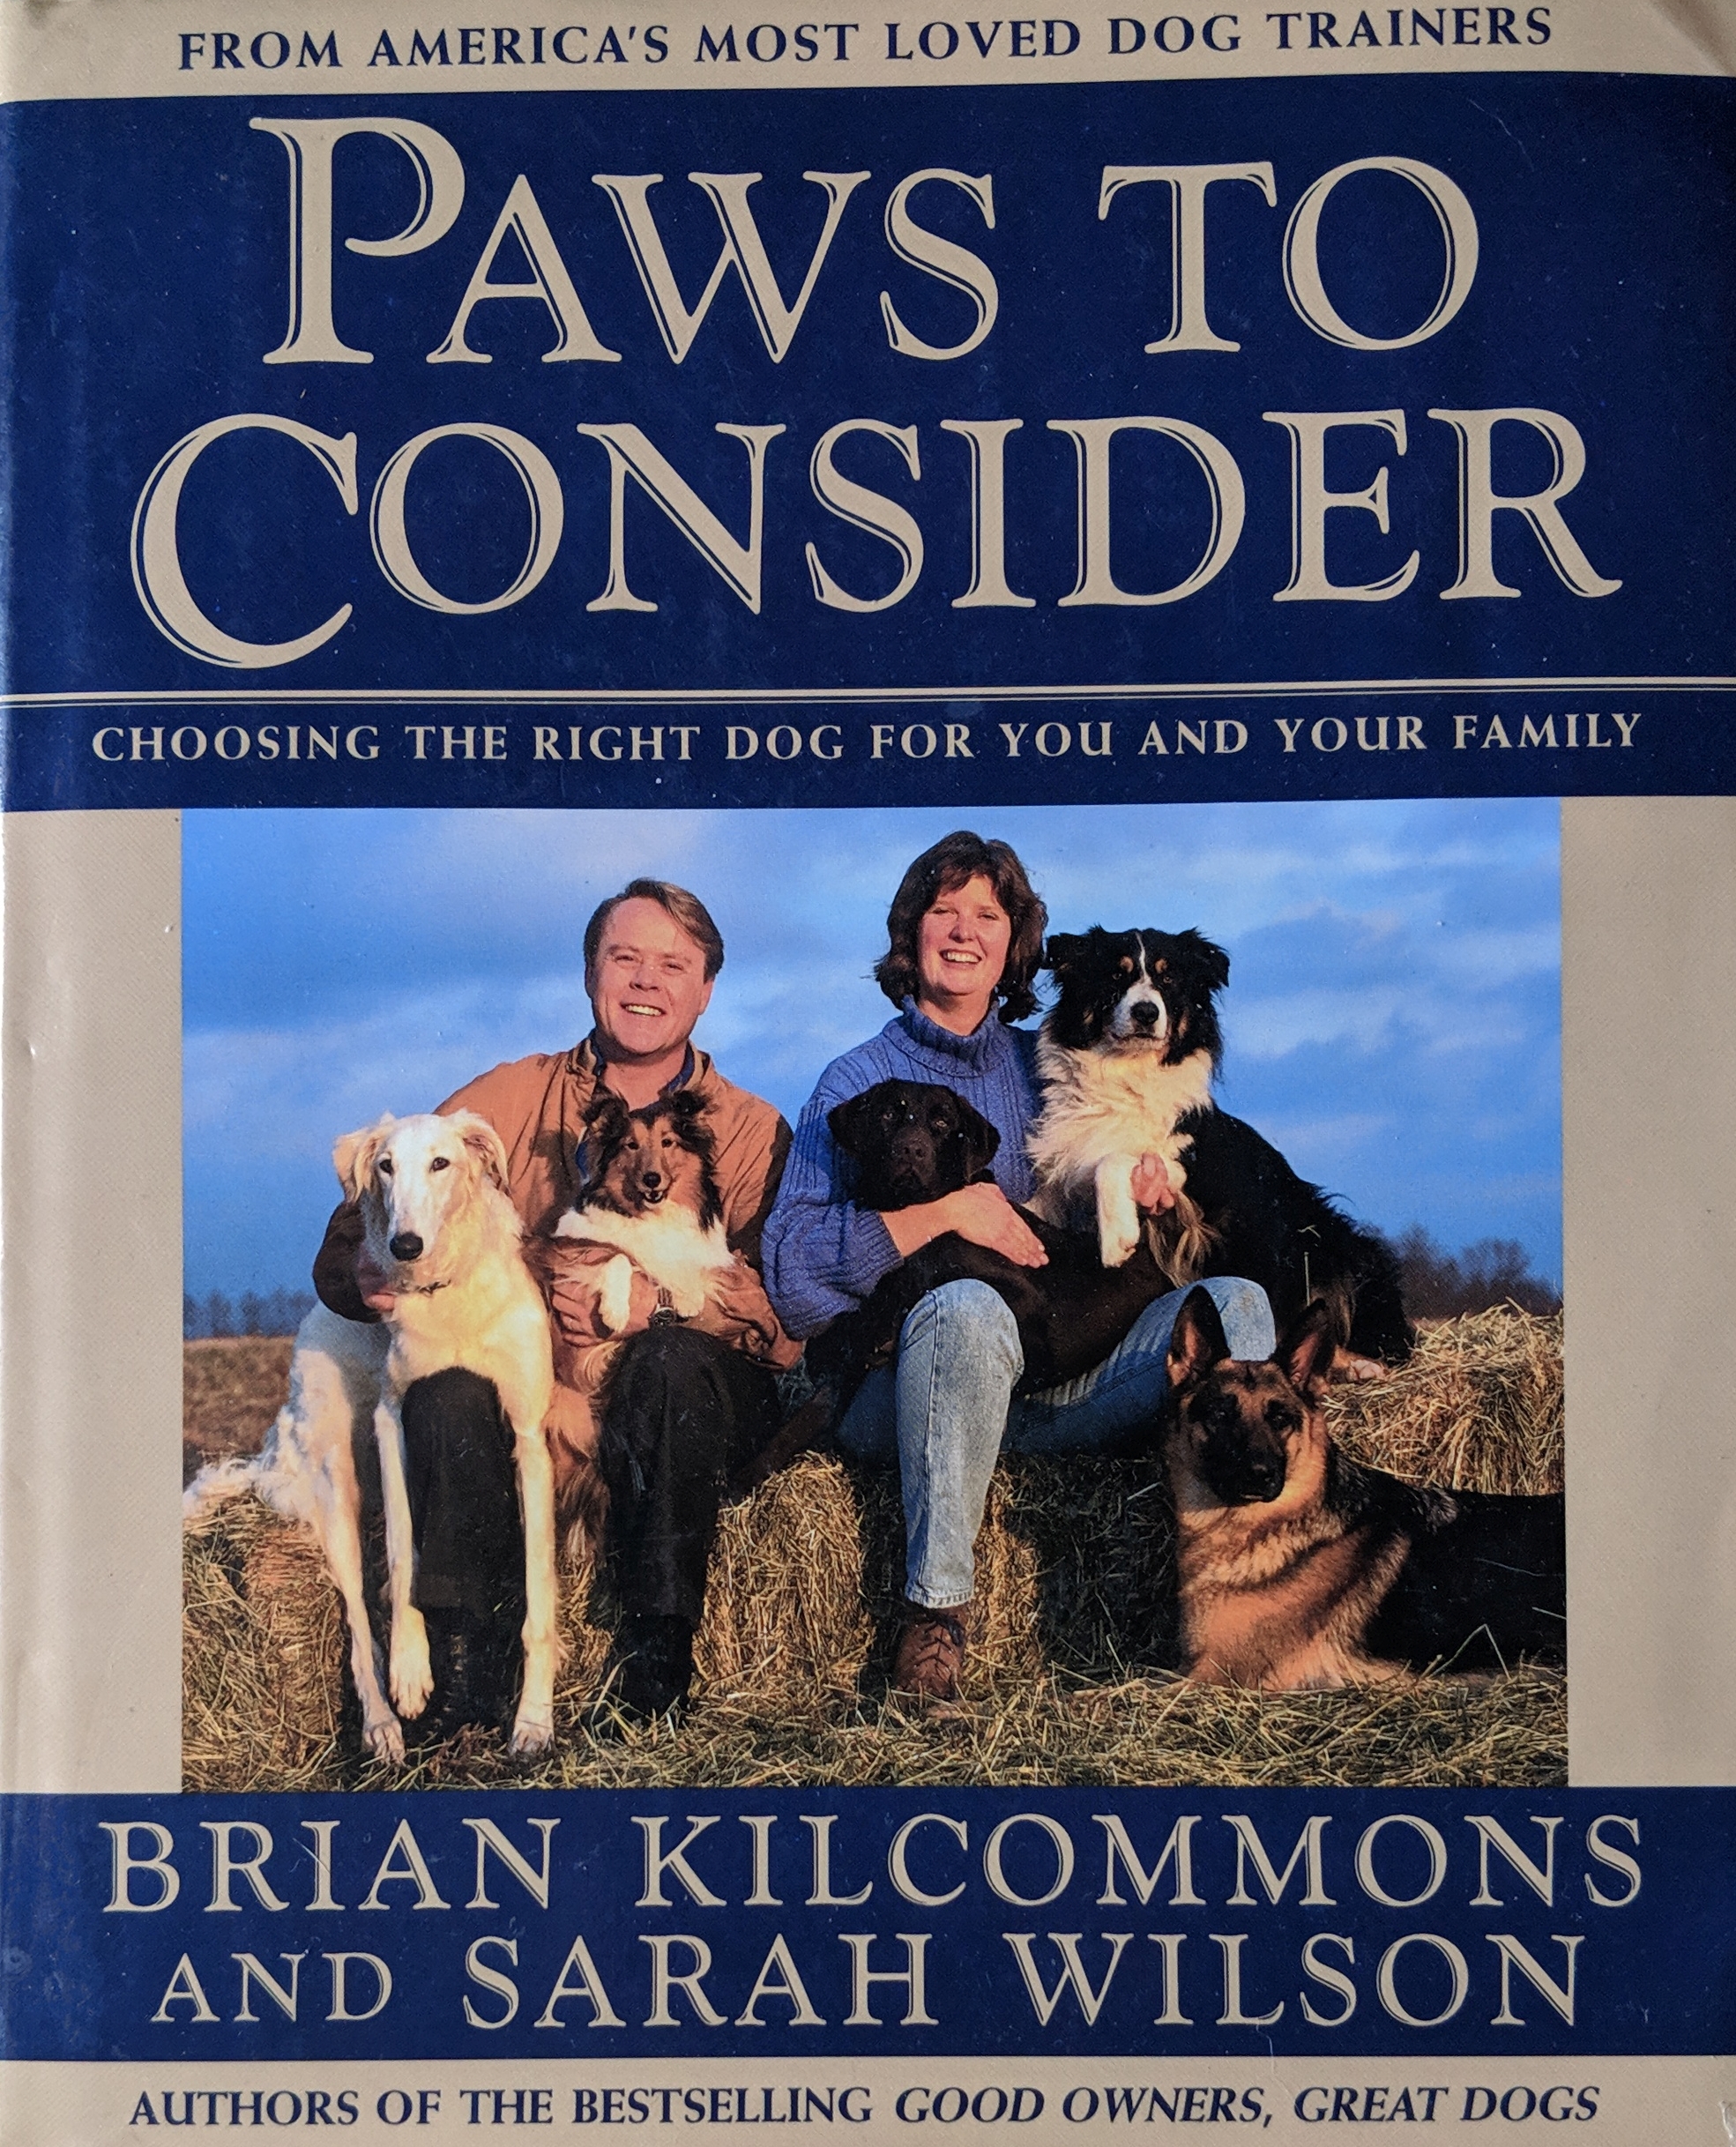 Paws To Consider by Brian Kilcommons and Sarah Wilson